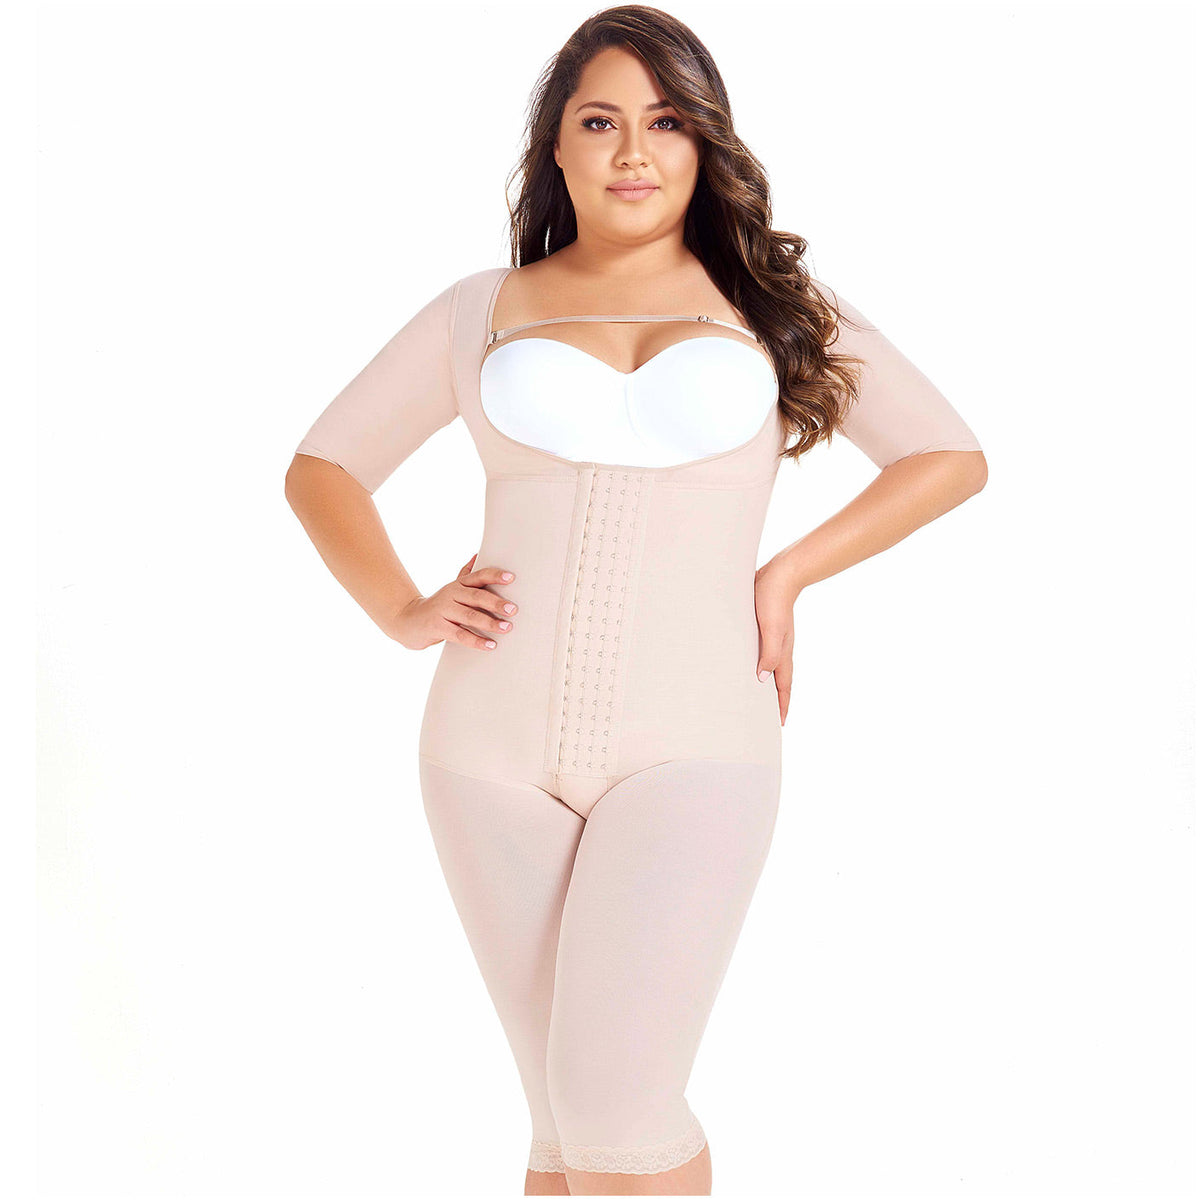 Fajas MariaE 9142 Long Sleeve Postoperative Shapewear With Over Bust Strap | After Pregnancy Compression Garment